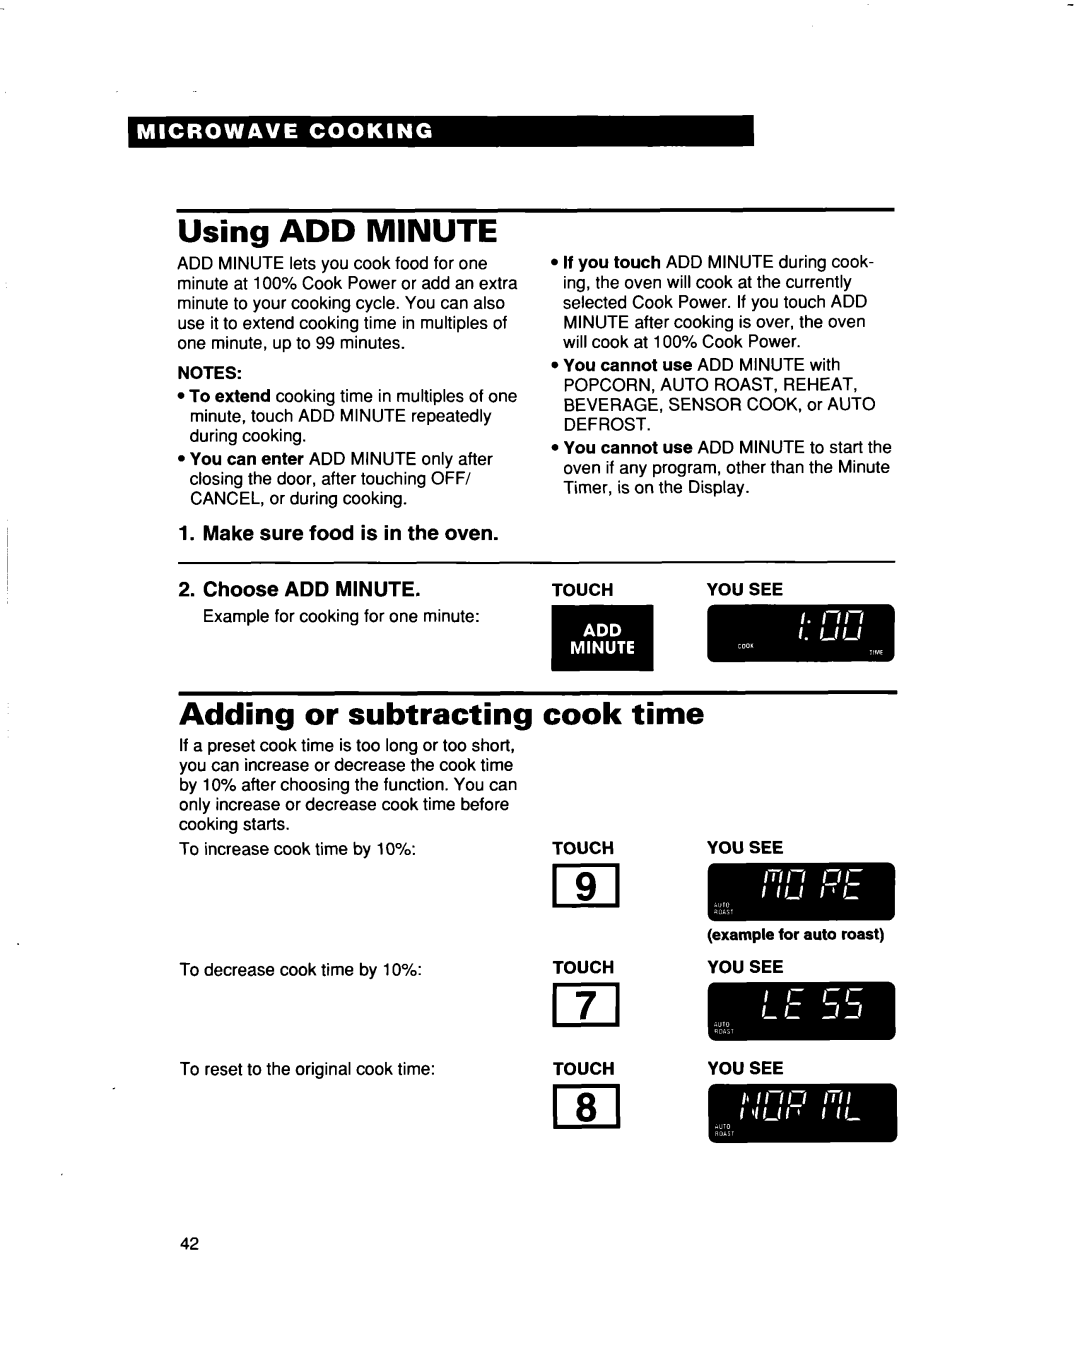 Whirlpool MH9115XB Using ADD MINUTE, Adding or subtracting cook time, Make sure food is in the oven, Choose ADD MINUTE 